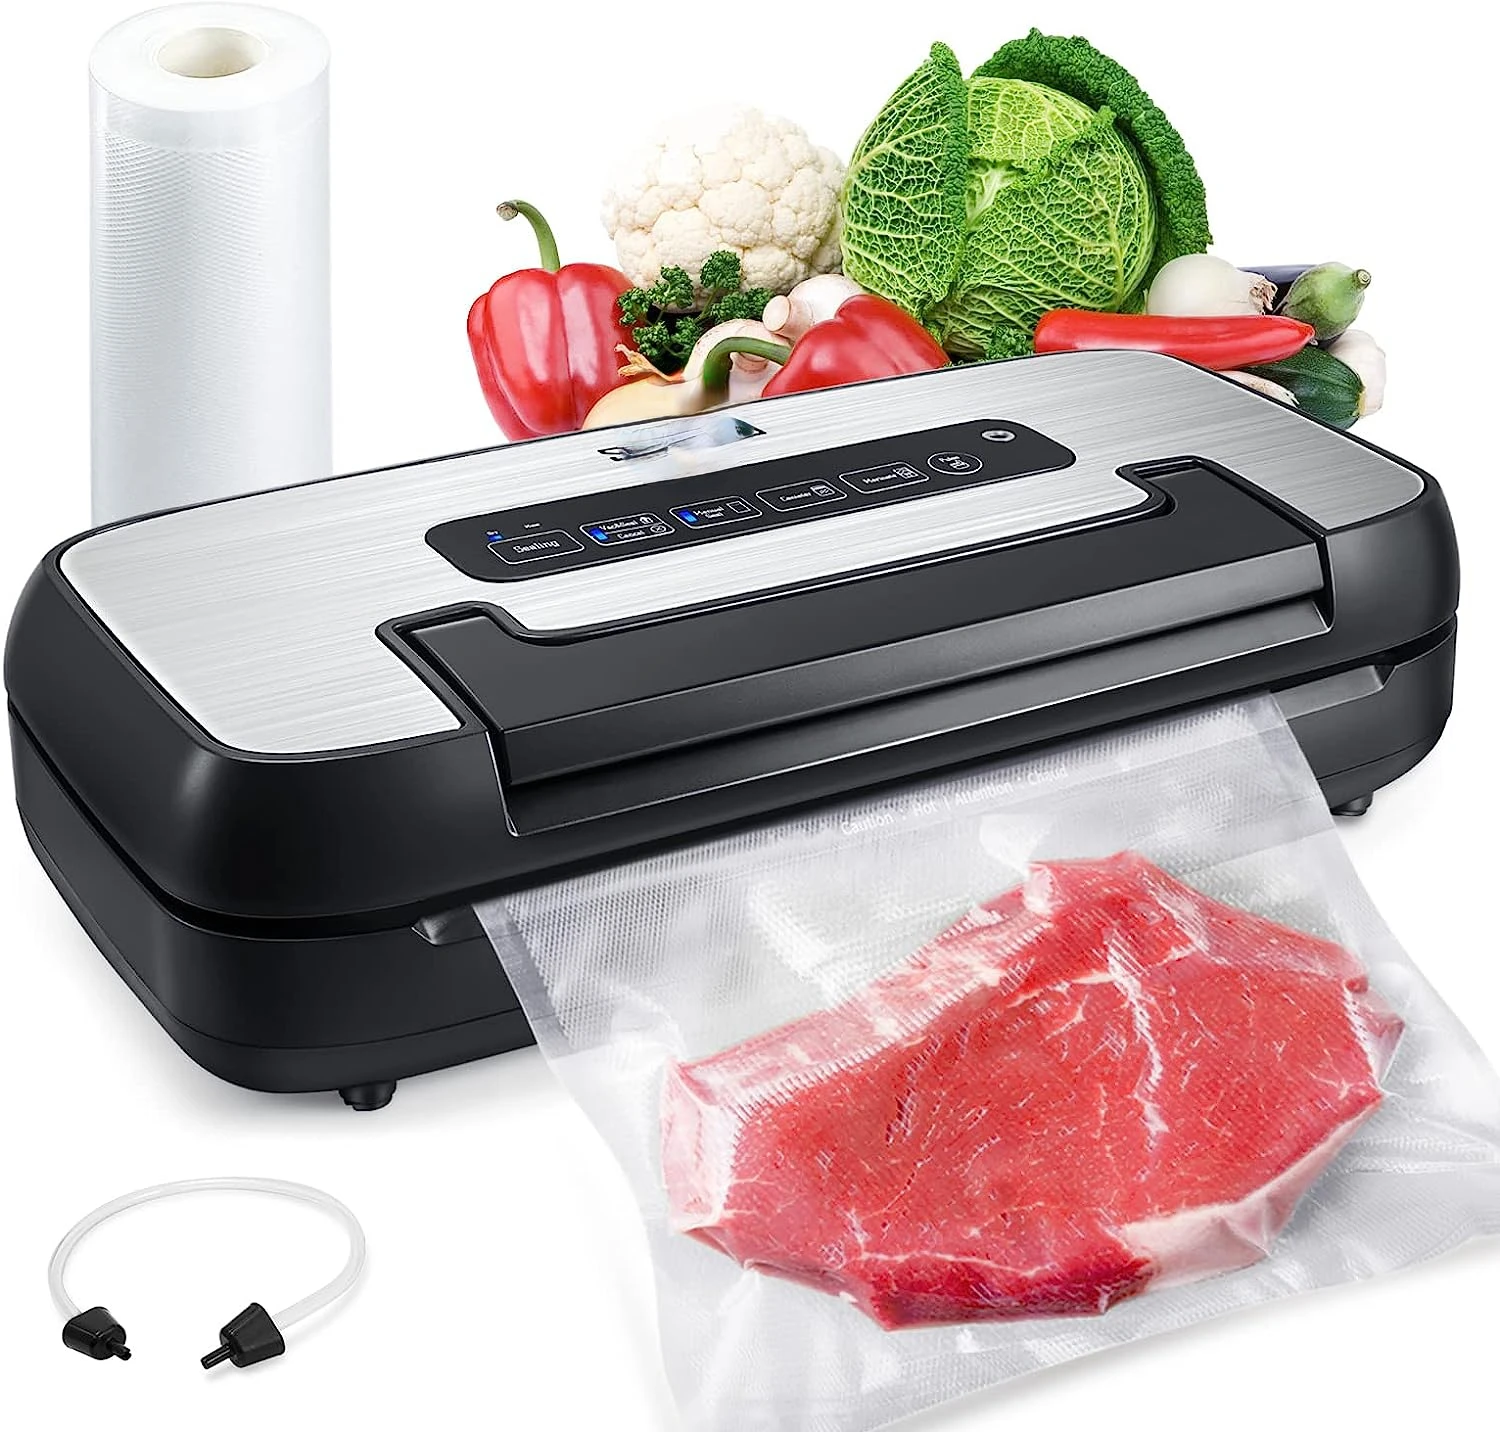 

VH5156 Vacuum Sealer, Handle Lock Design, Over 200 Continuous Uses Without Overheating, 80kpa Multifunctional Commercial and Hom